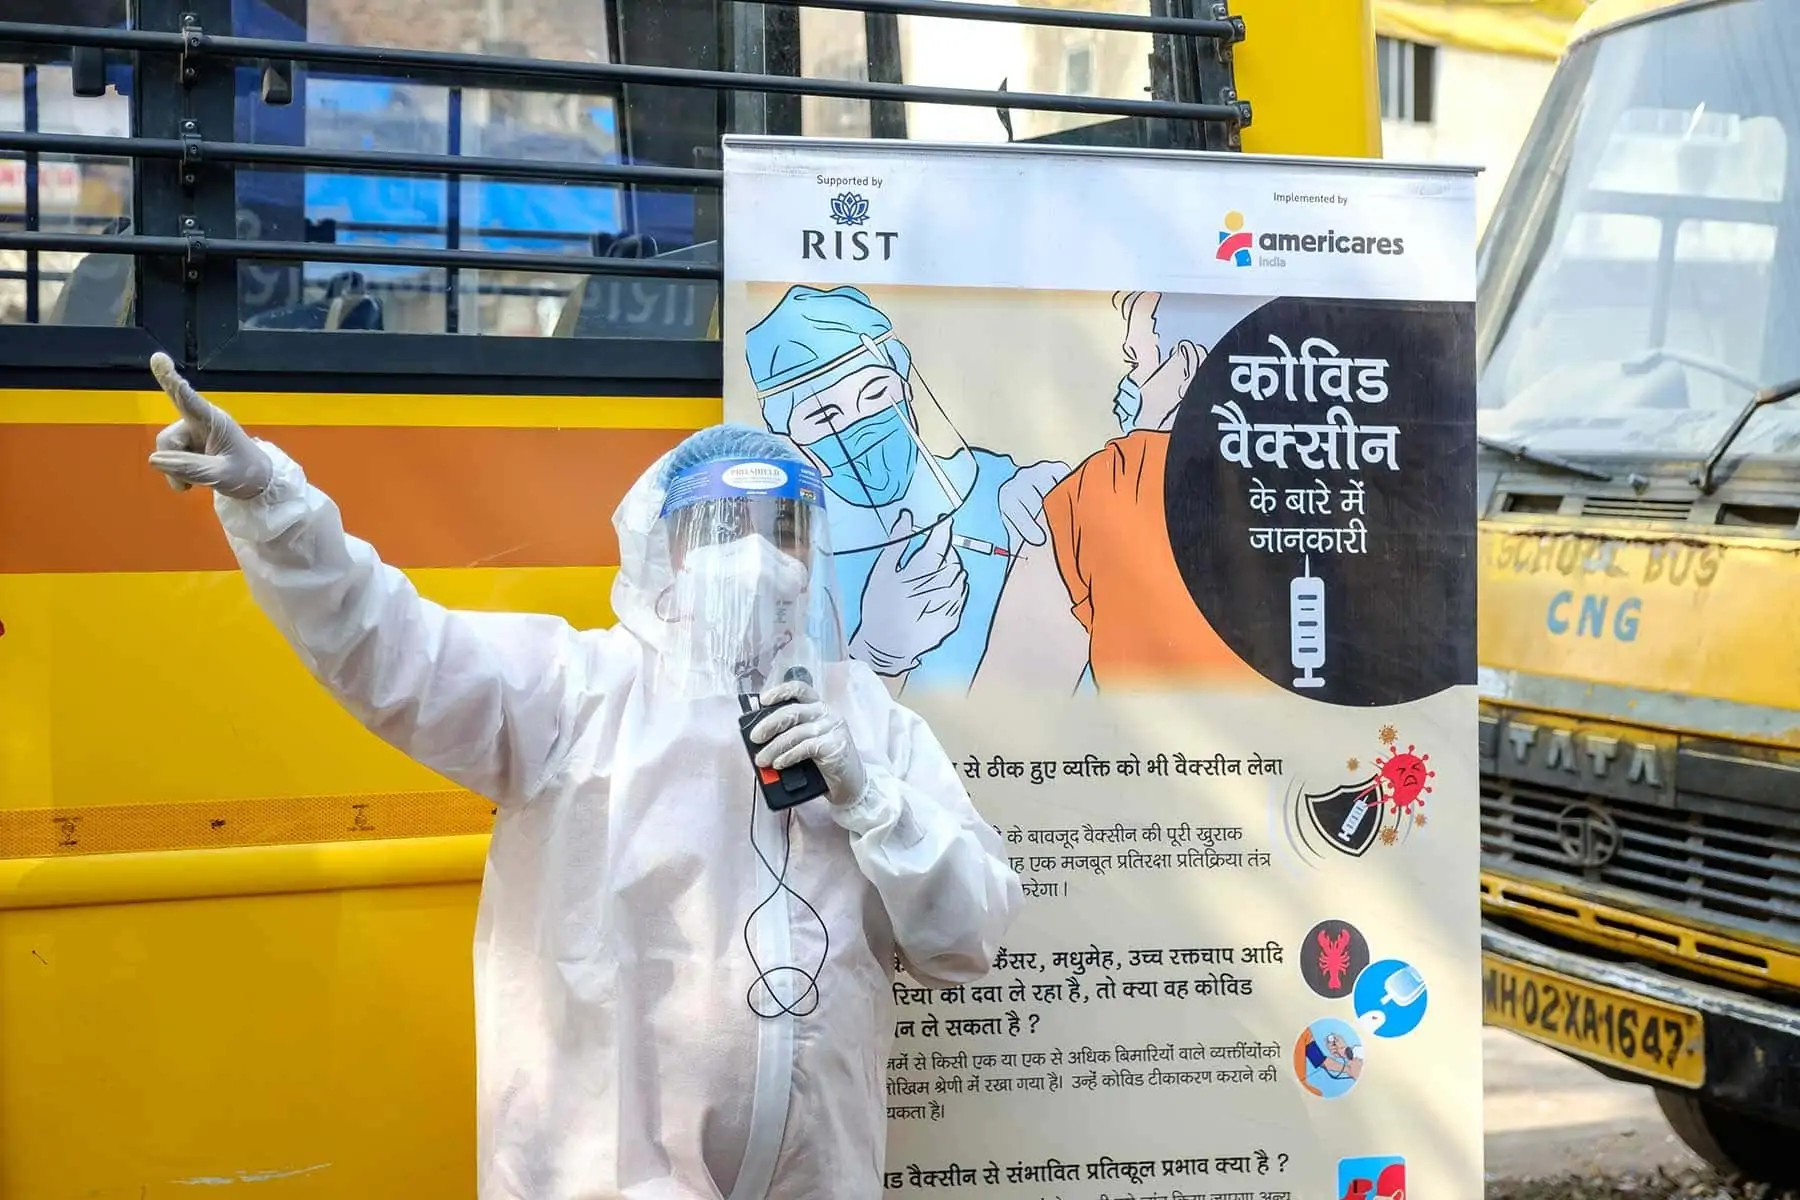 An Americares India staff member educates community members in Mumbai about the importance of COVID-19 vaccination in March. Photo courtesy of Americares India